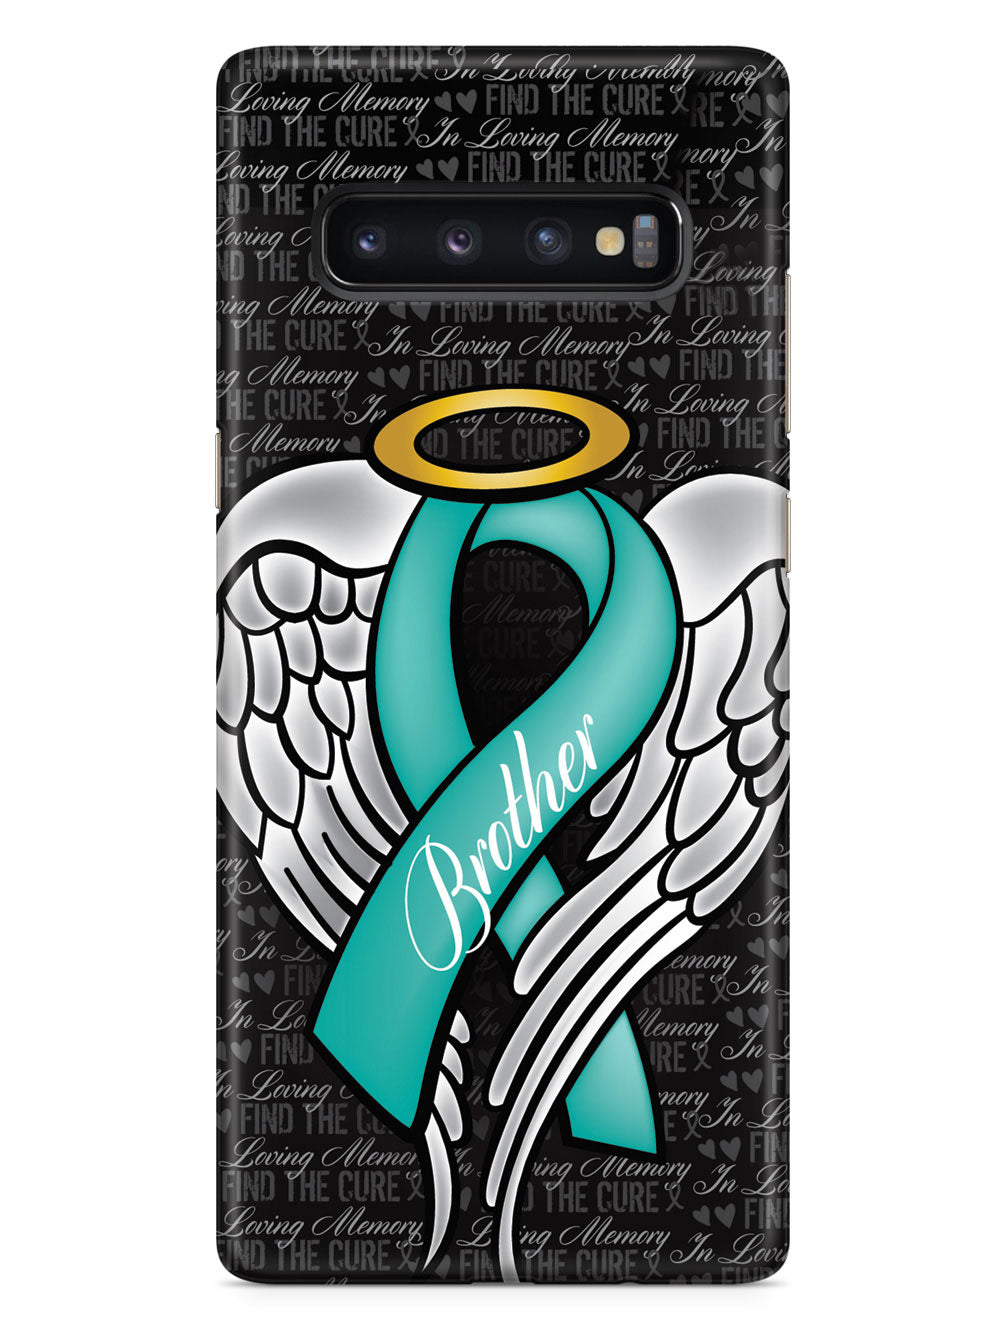 In Loving Memory of My Brother - Teal Ribbon Case